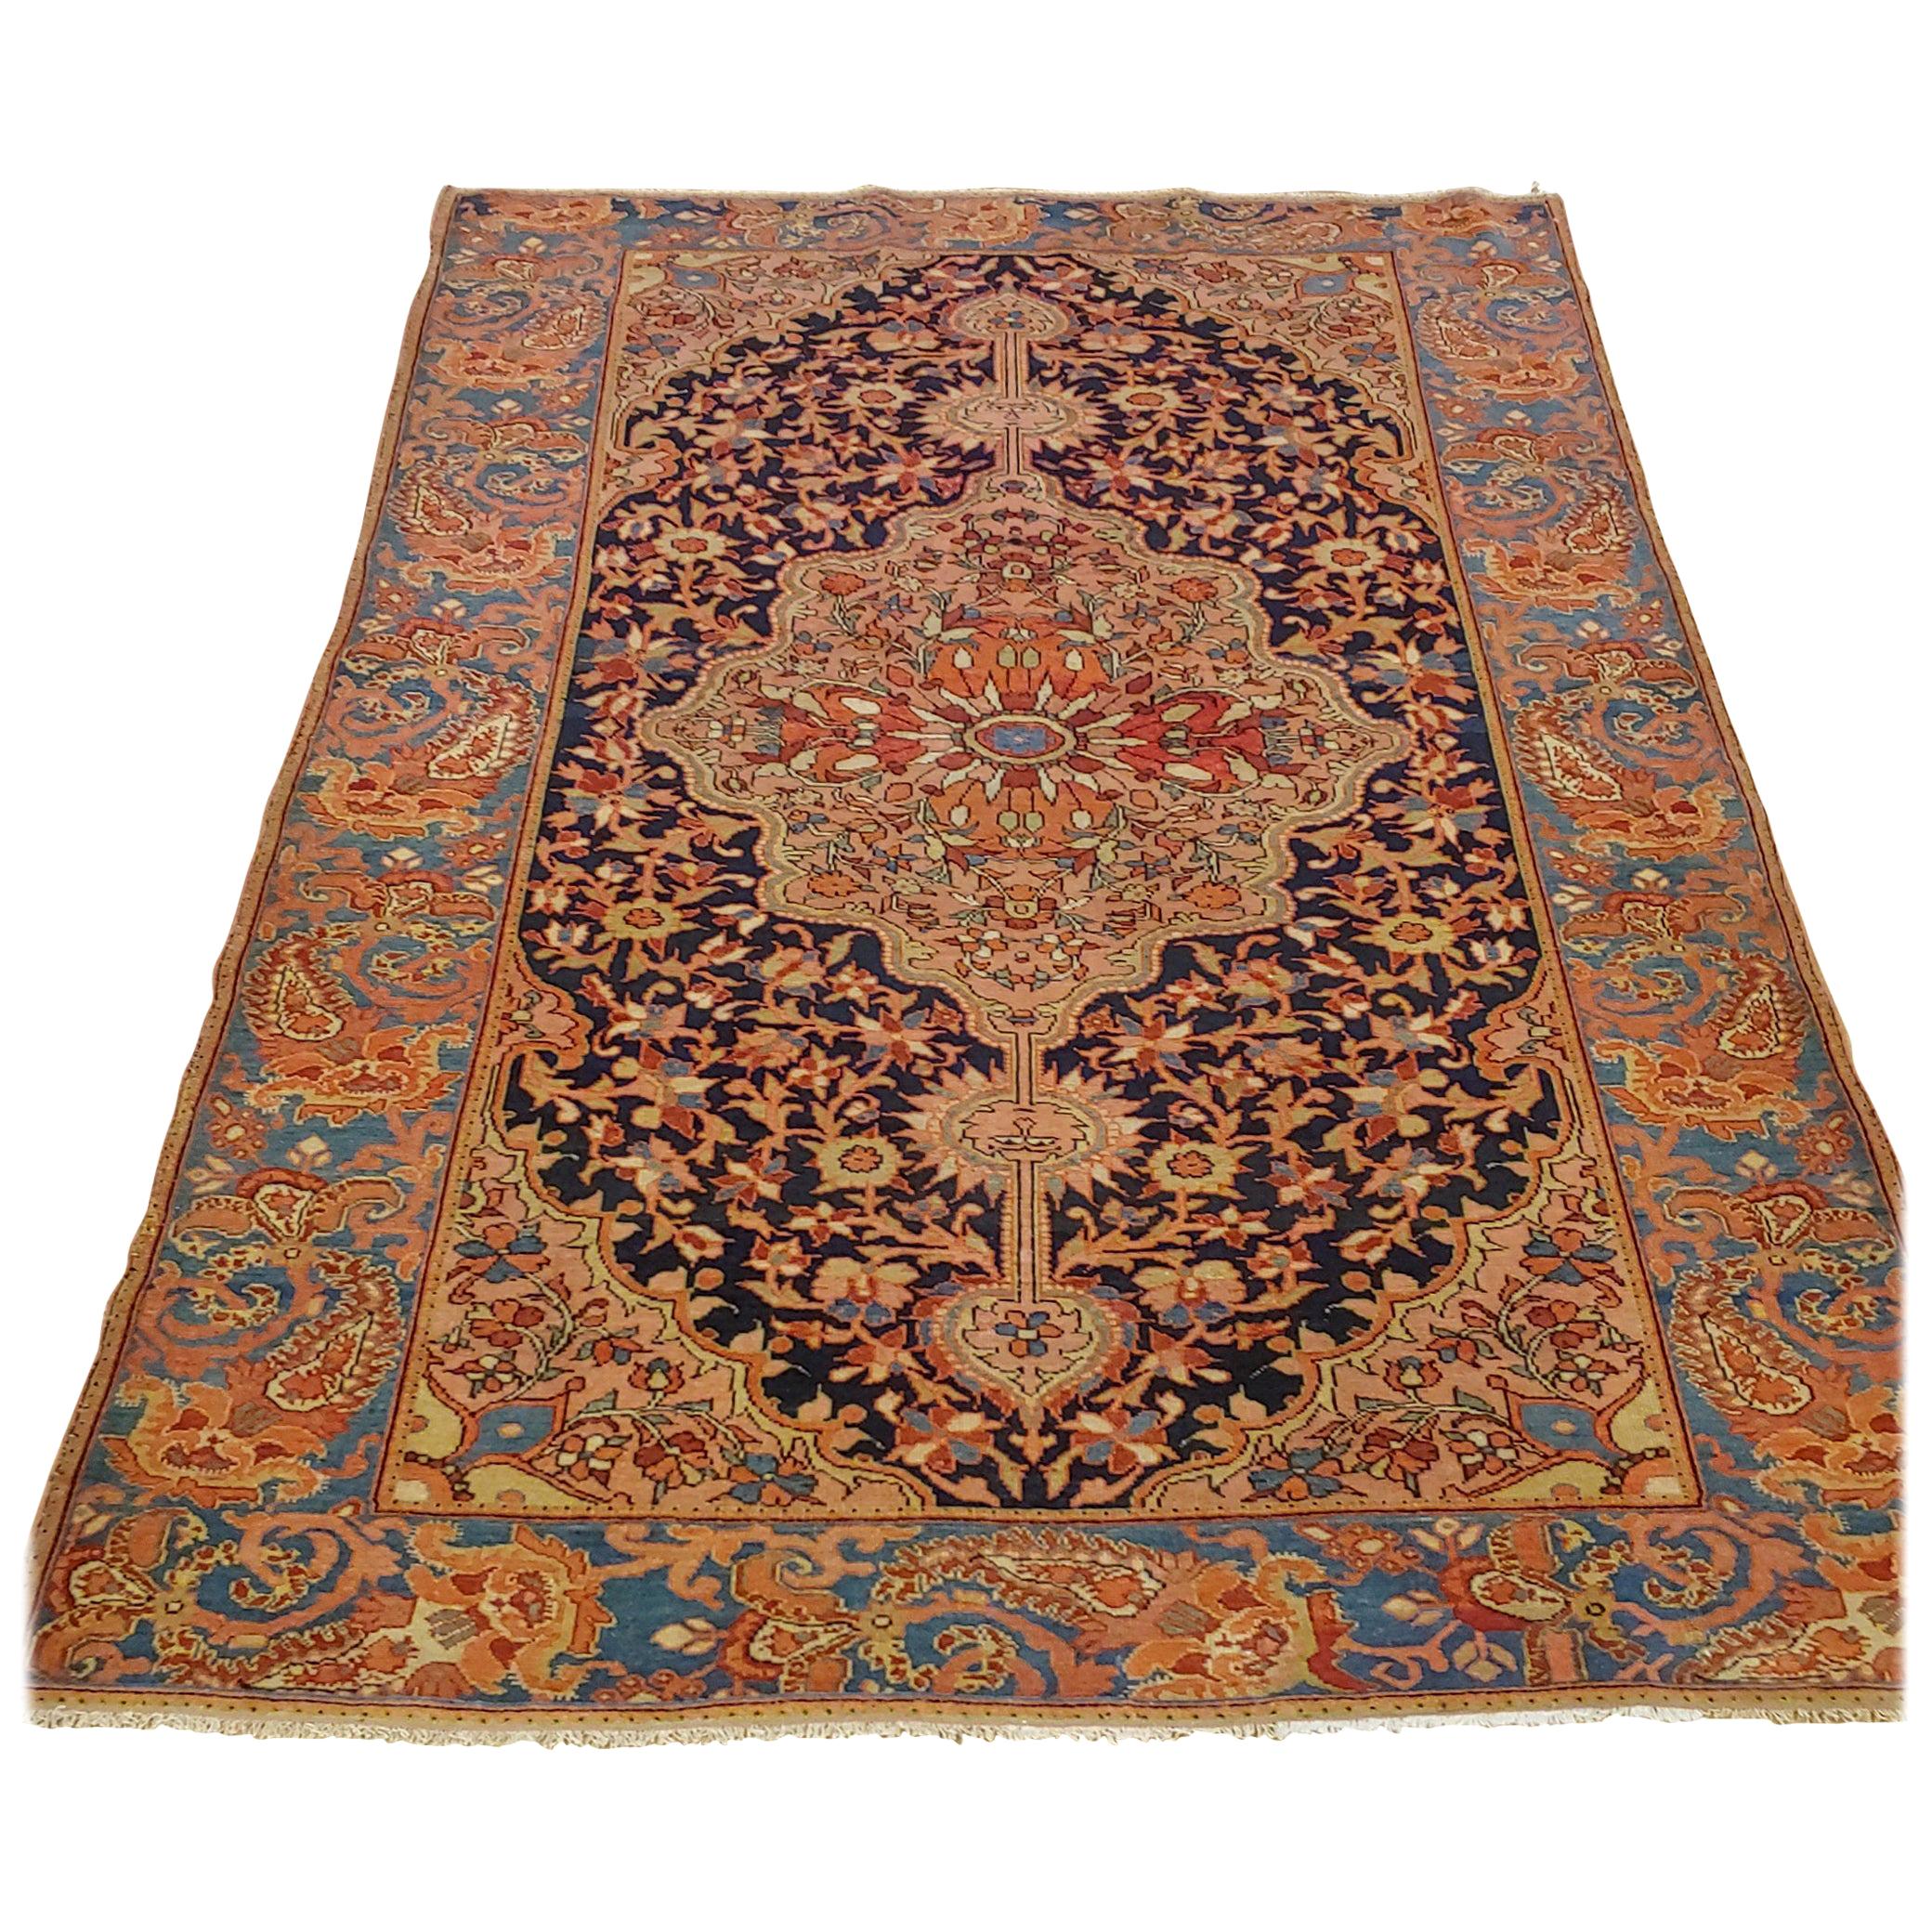 Antique Persian Malayer, Floral Motif on Navy, Paisley Border Wool, 4x6, 1910 For Sale